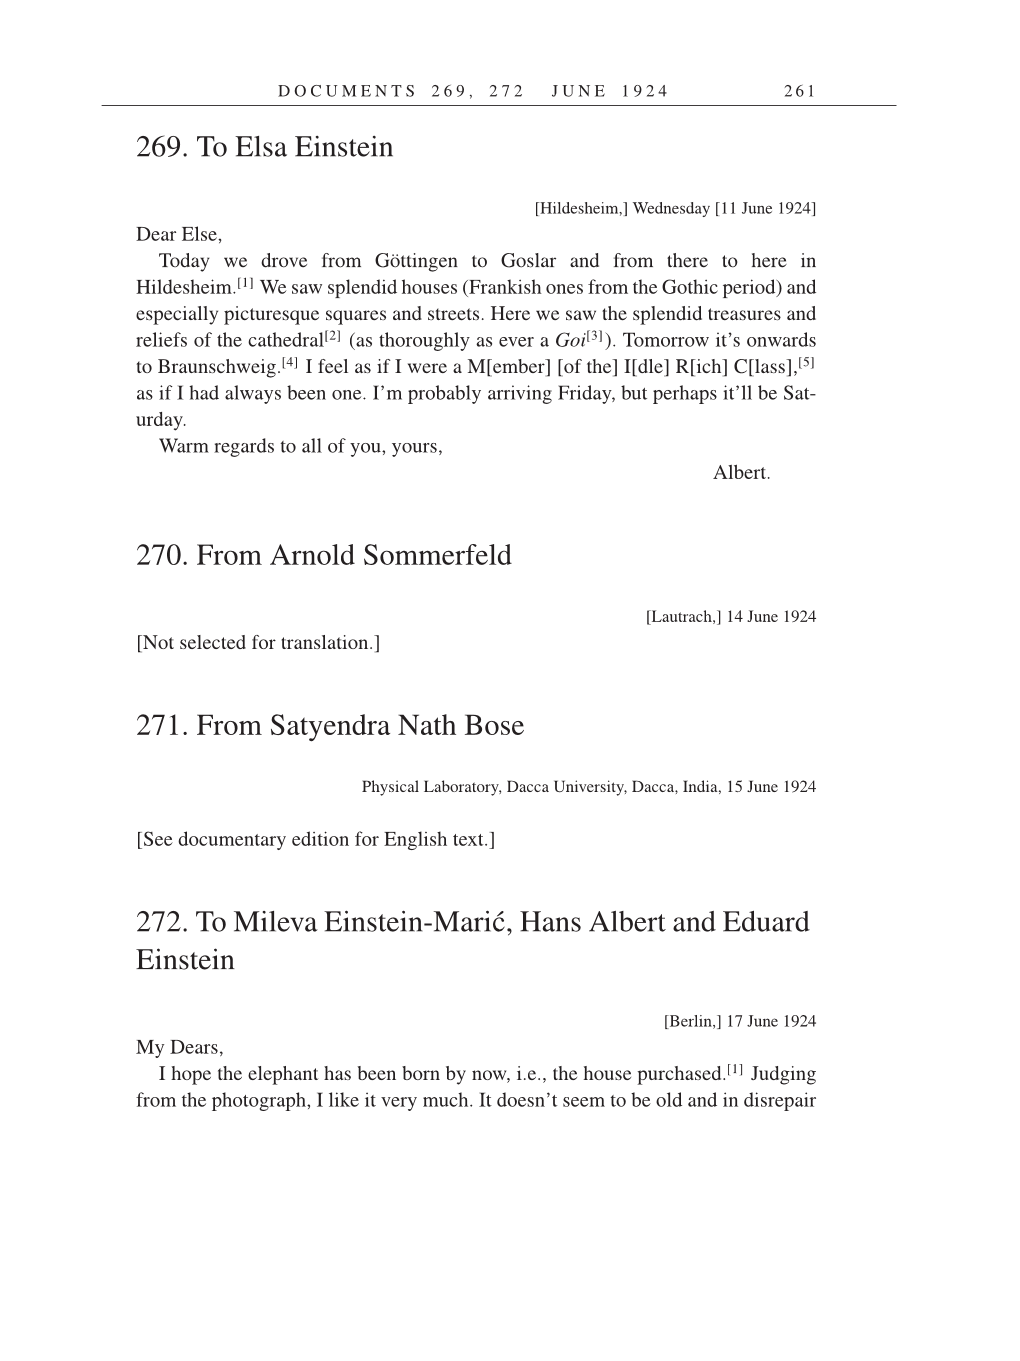 Volume 14: The Berlin Years: Writings & Correspondence, April 1923-May 1925 (English Translation Supplement) page 261